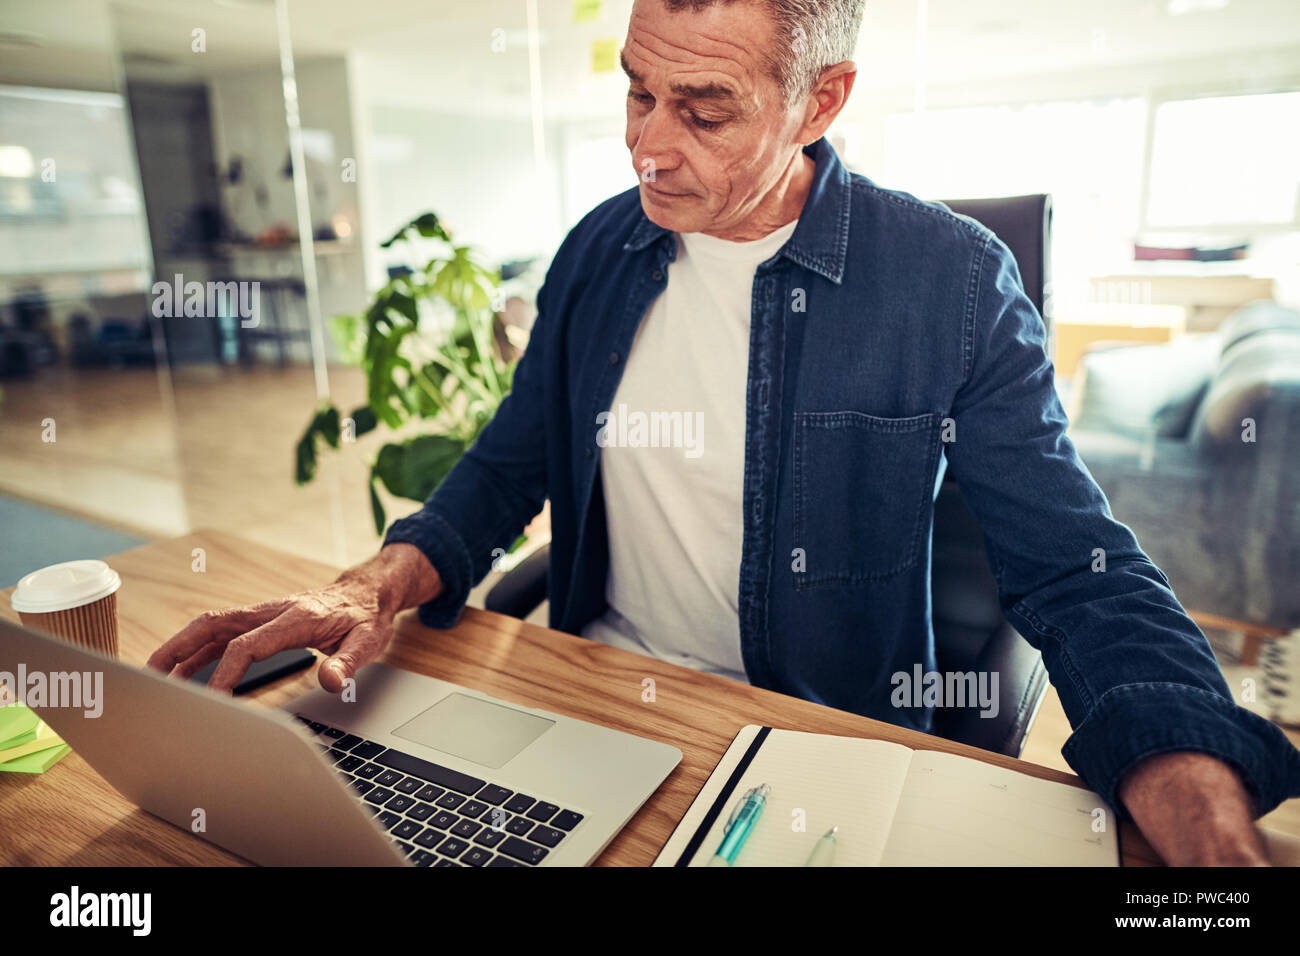 Casually dressed mature businessman sitting at his desk in an office working on a laptop and going over his schedule Stock Photo